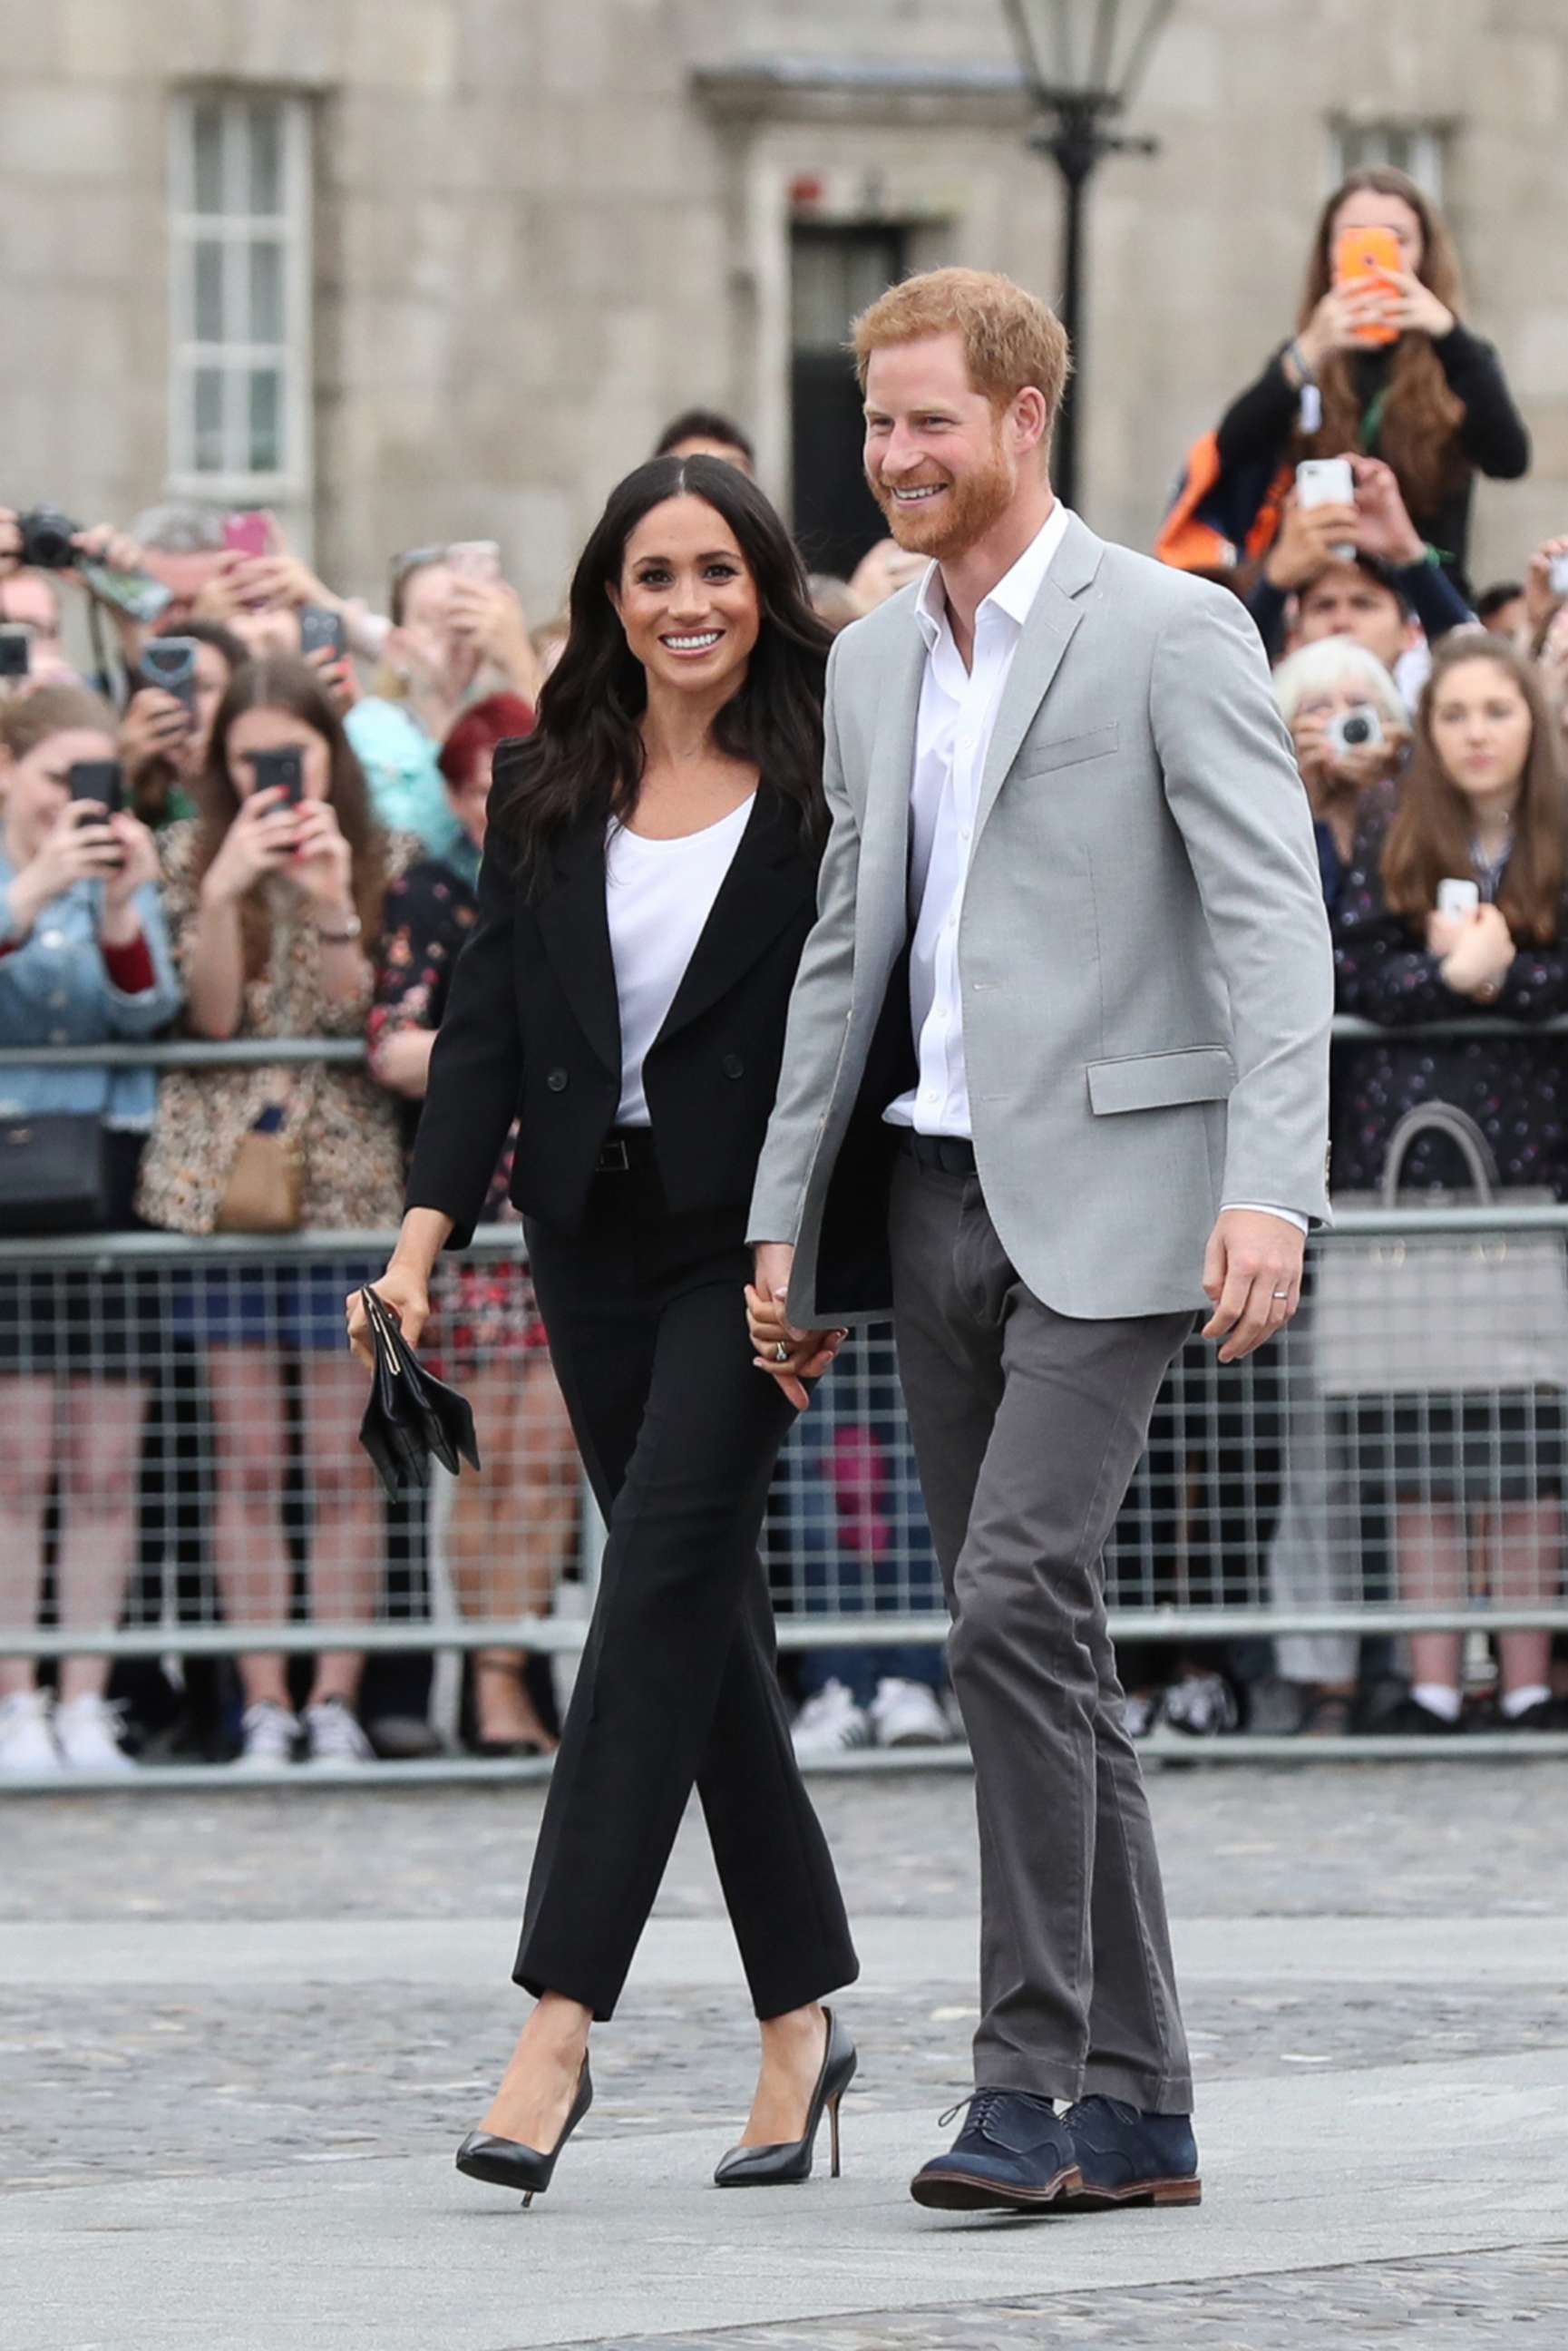 PHOTO: Meghan Markle, Duchess of Sussex and Prince Harry, Duke of Sussex visit Trinity College on the second day of their official two day royal visit to Ireland on July 11, 2018 in Dublin.